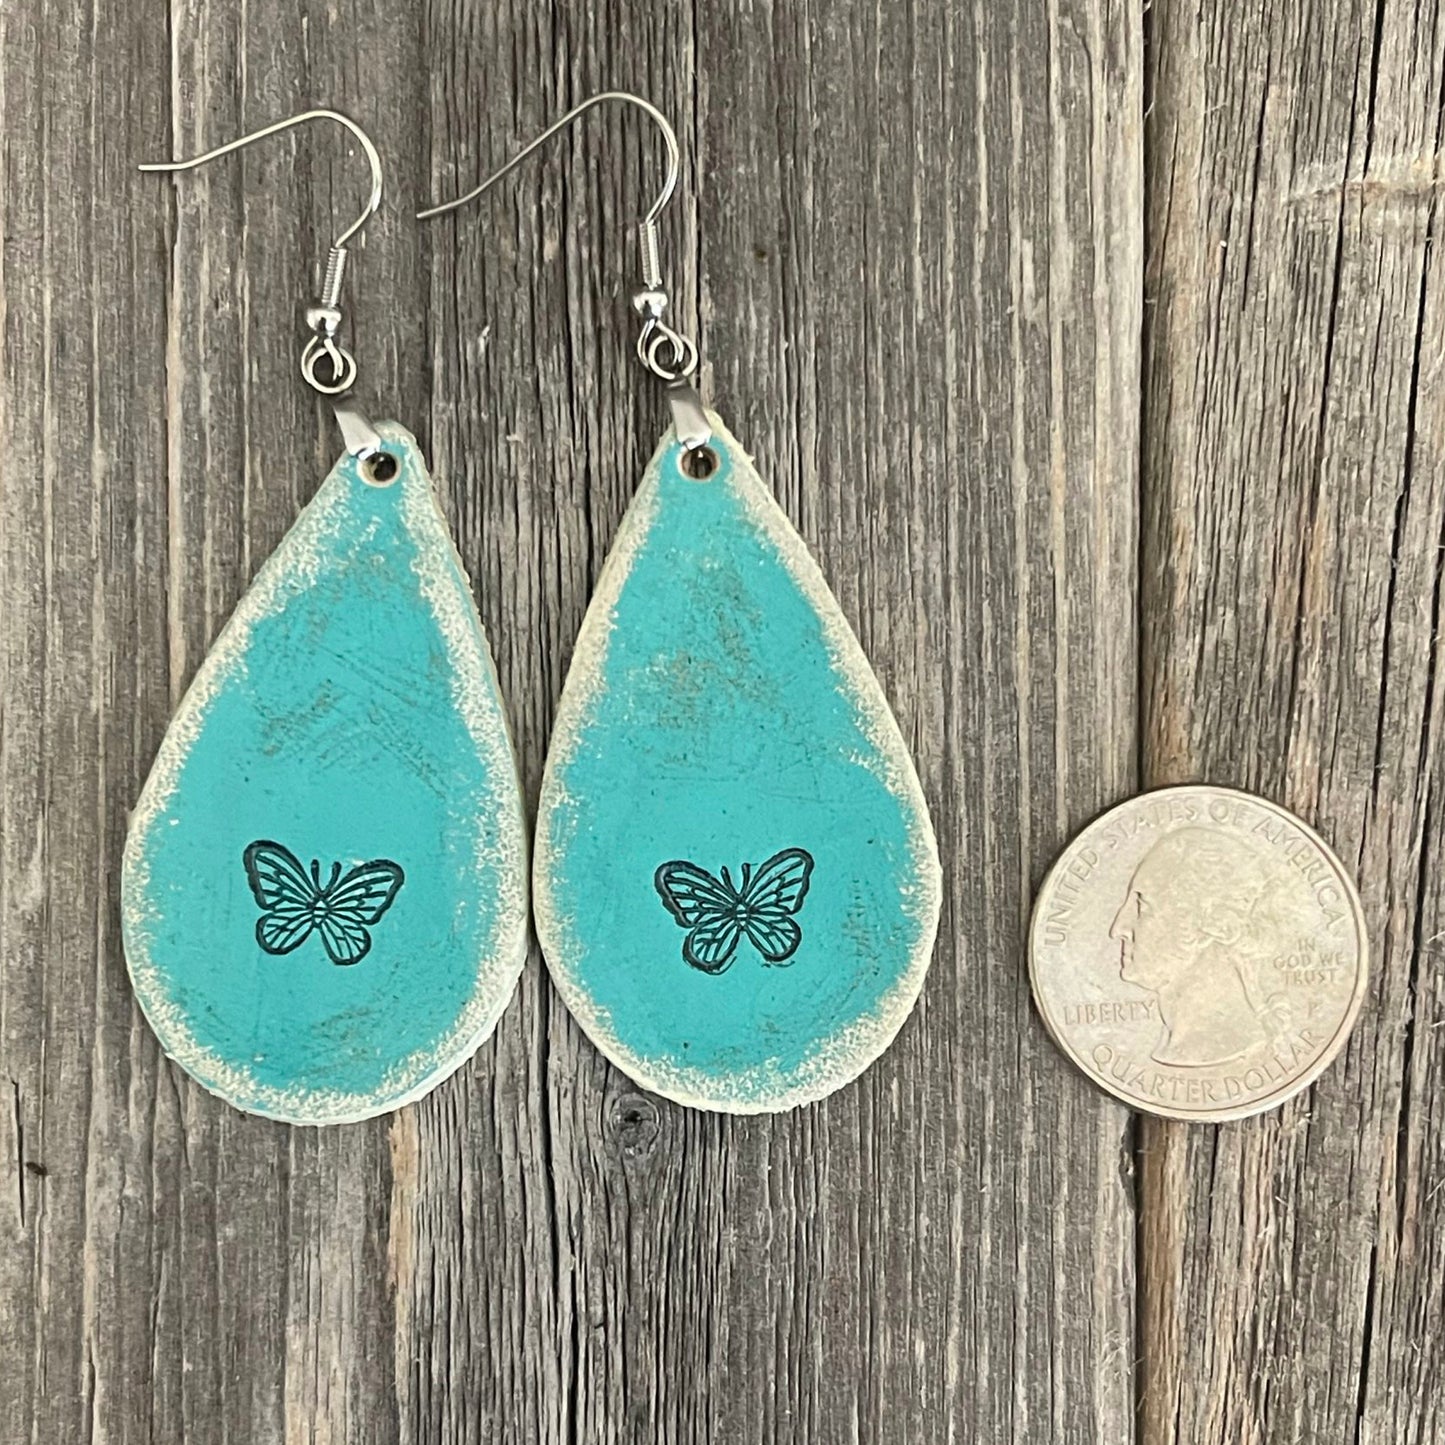 MADE TO ORDER - One of a Kind, genuine leather boho handmade earrings with rustic butterfly design